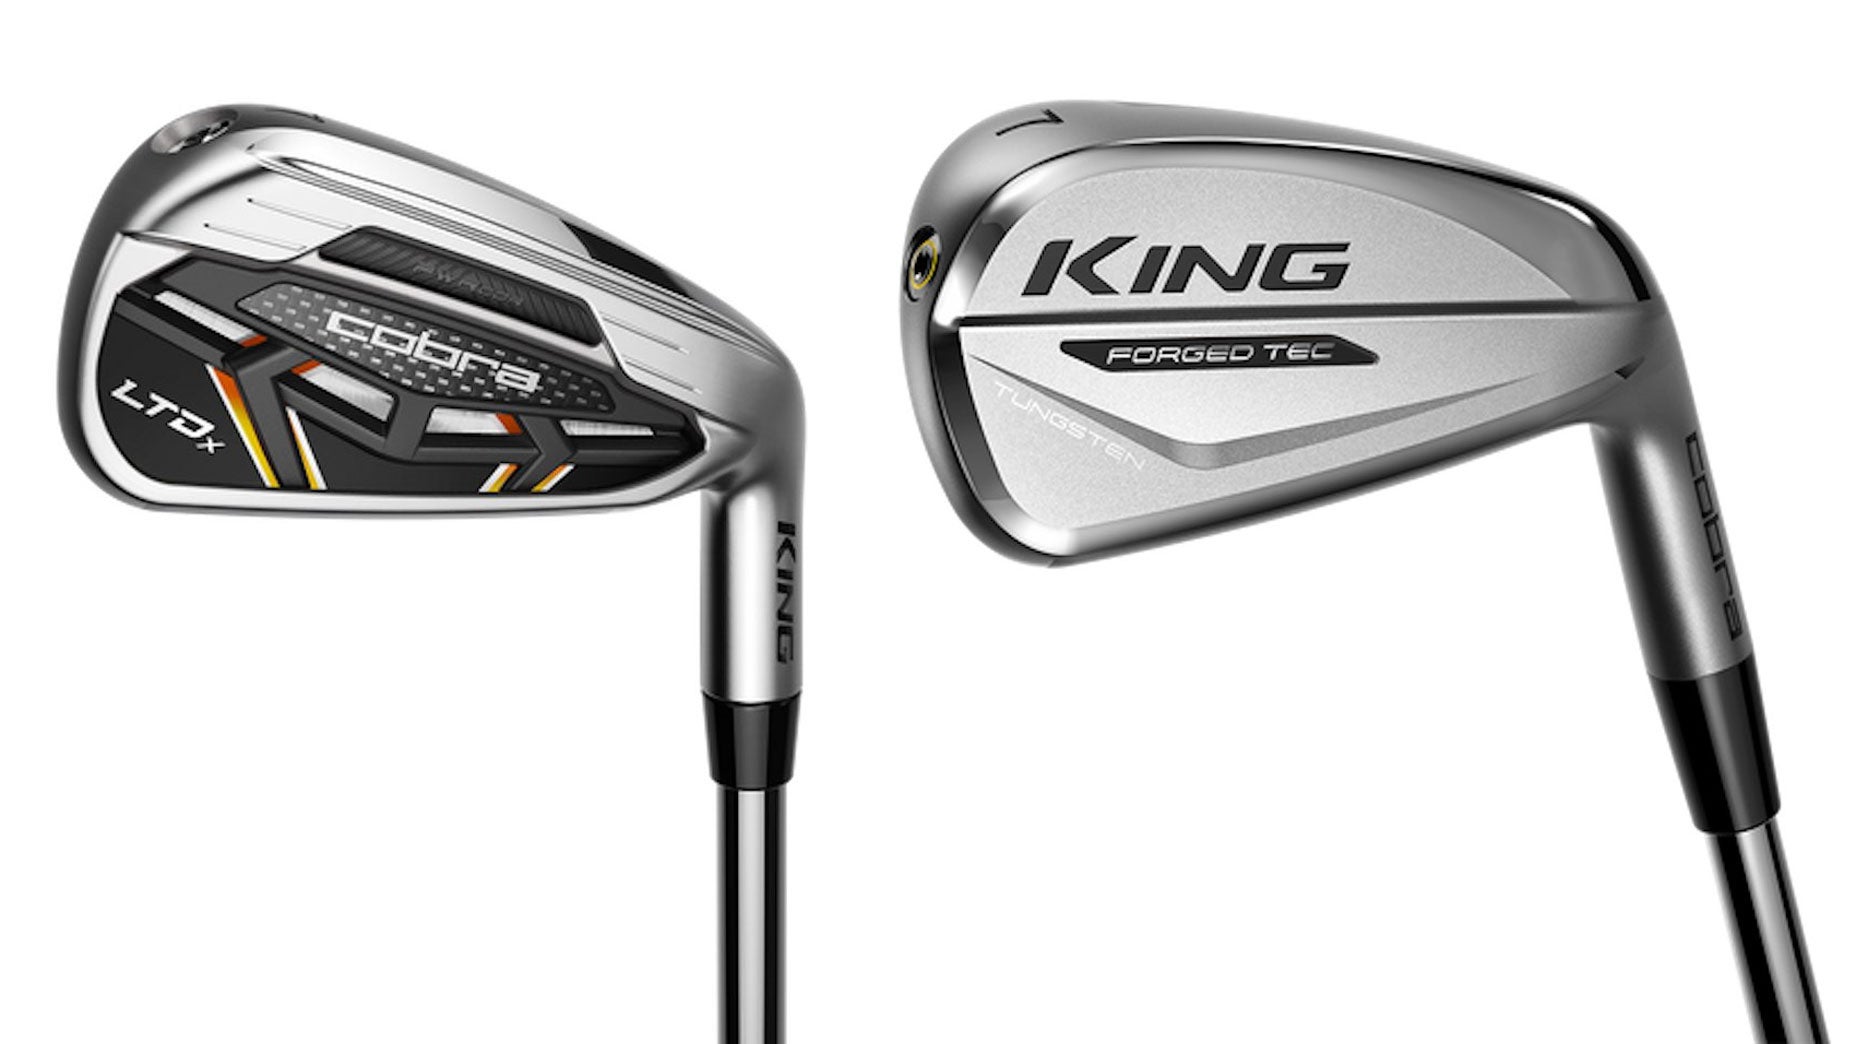 Cobra King Forged Tec, Forged Tec One Length, and Forged Tec X